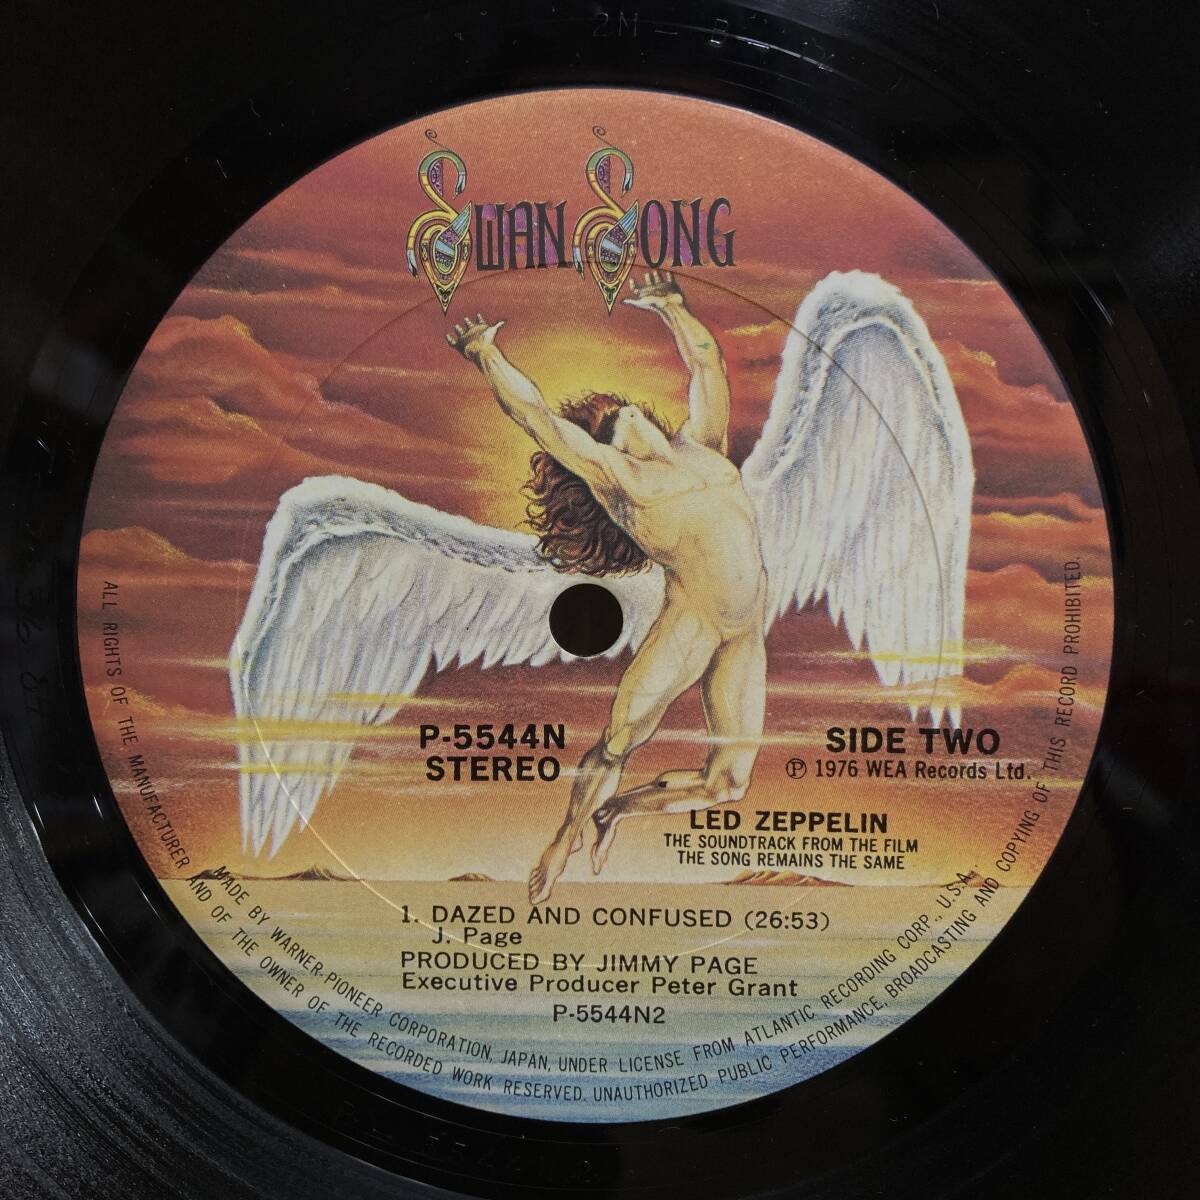 g63■【国内盤/2LP】Led Zeppelin レッド・ツェッペリン / The Song Remains The Same 永遠の詩 ● Swan Song / P-5544/5N 240325の画像7